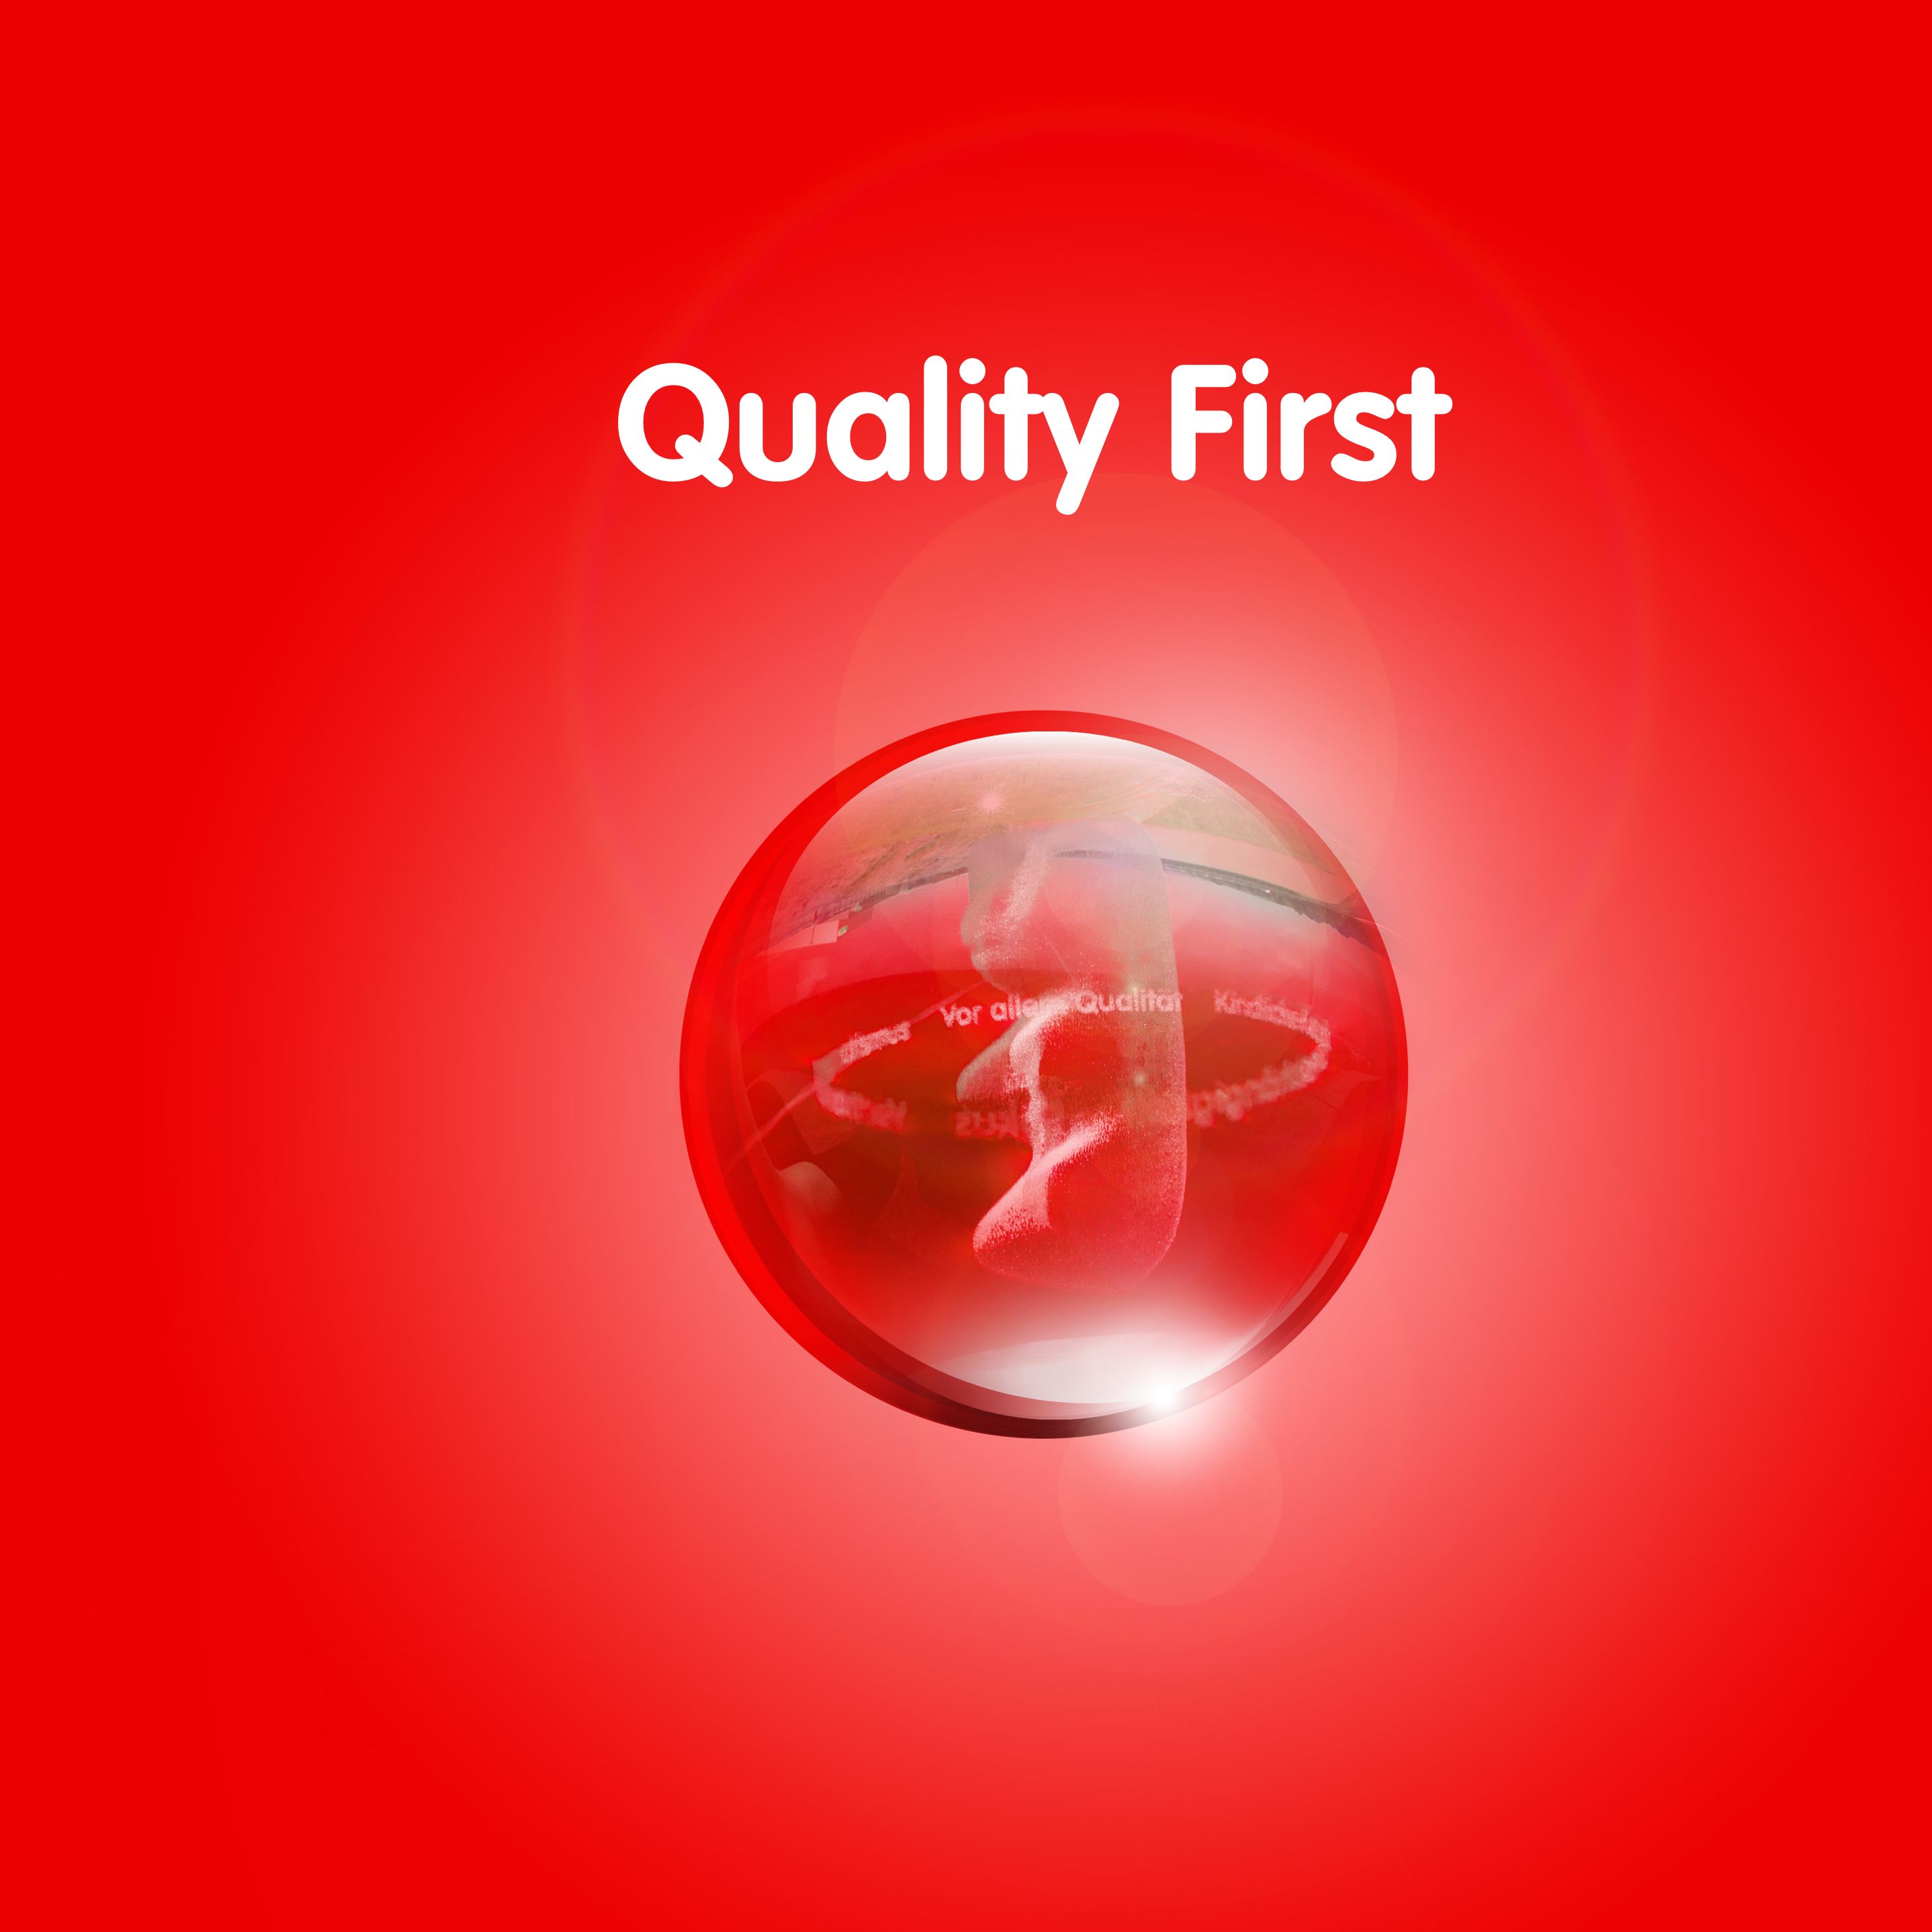 Graphic with Goldbear in transparent ball against red background with text: ‘Quality First’